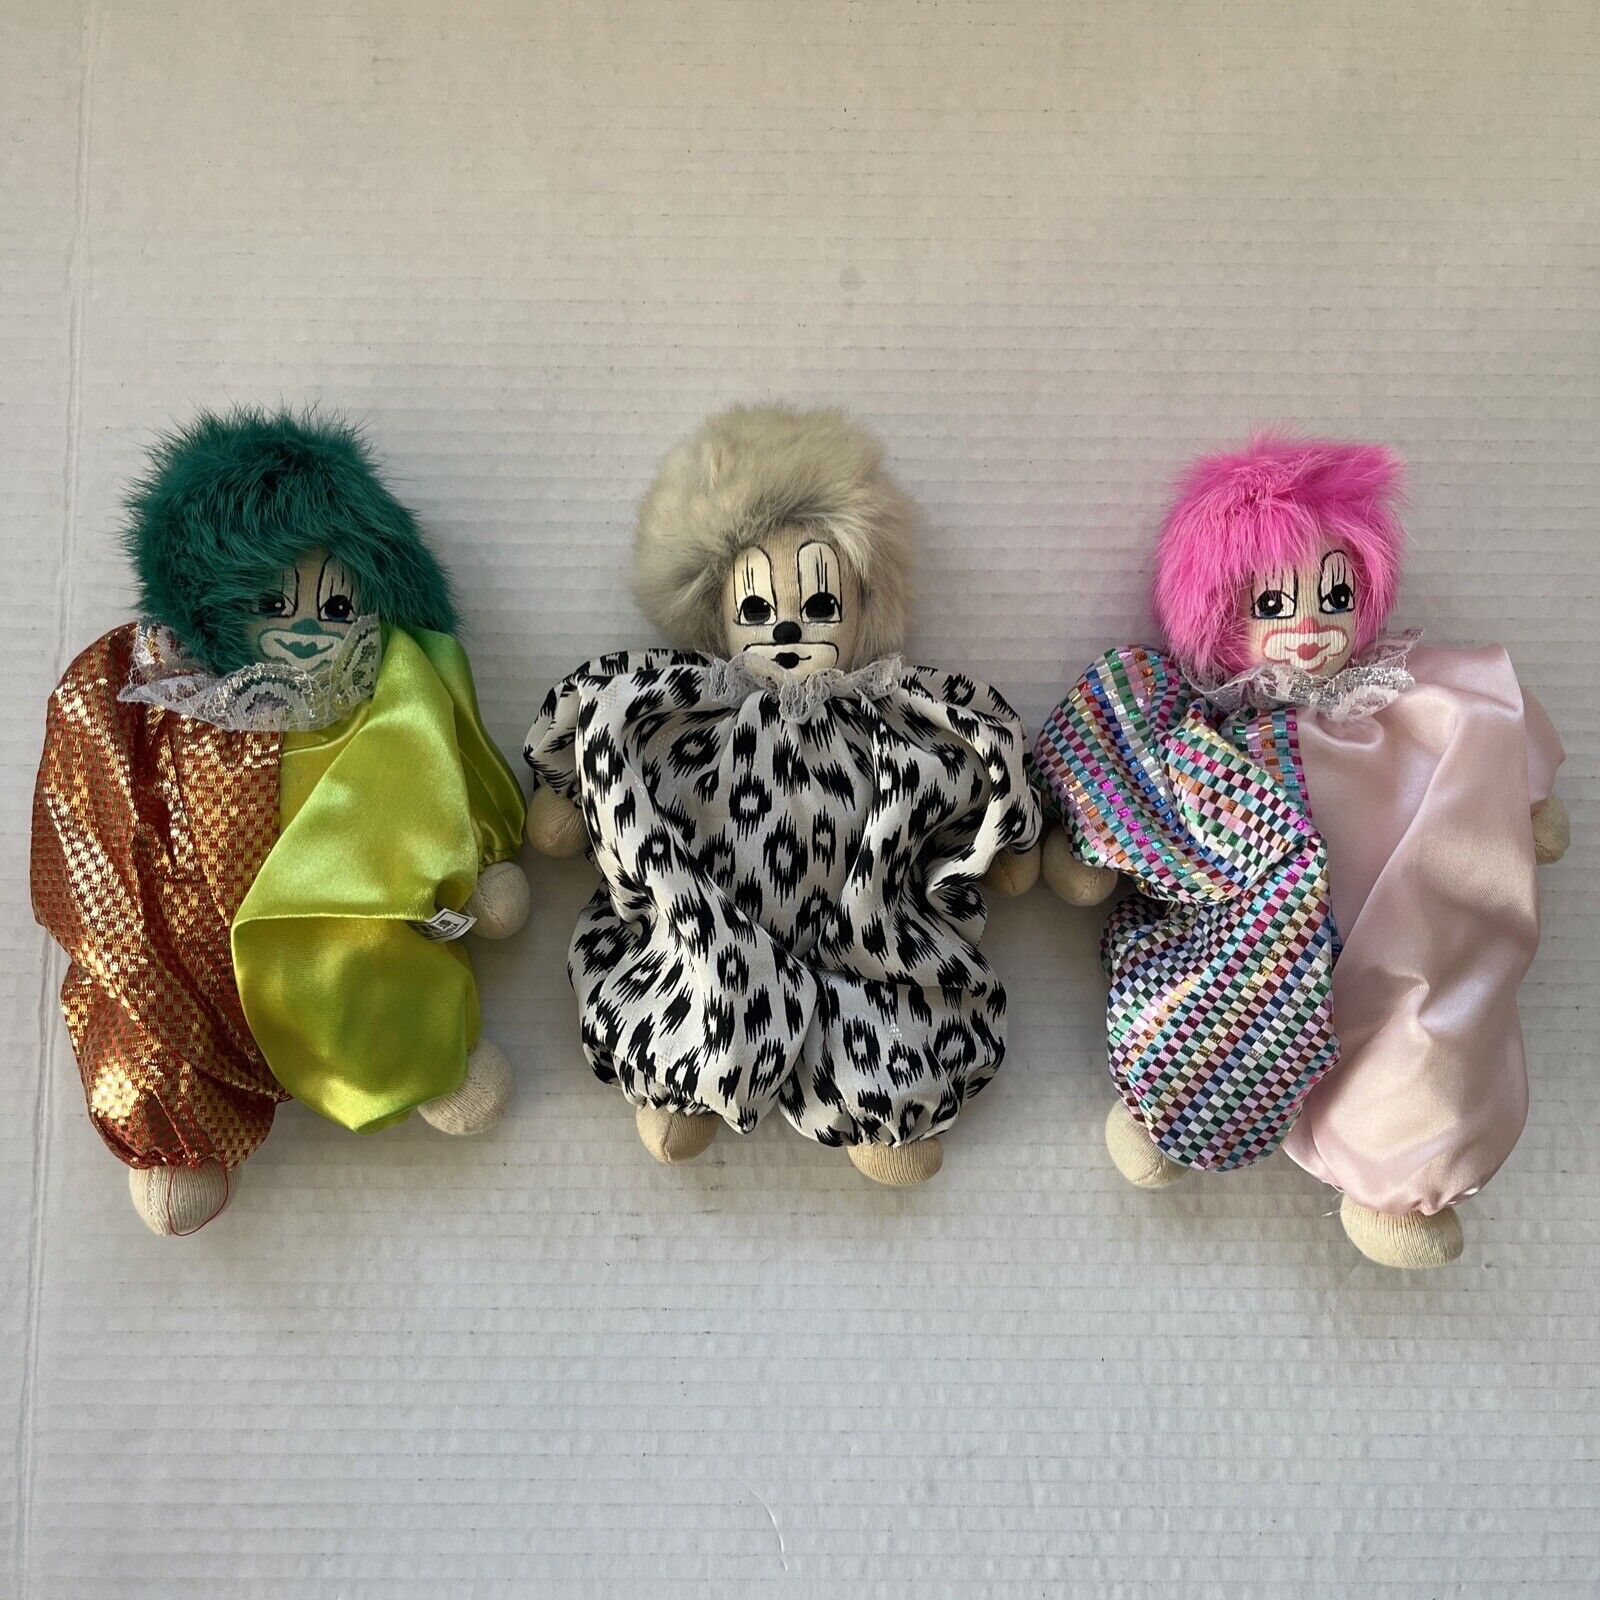 Vintage Q-Tee Clown 1980s Sand Doll Hand Made Hand Painted Lot of 3 Fur Hair 80s